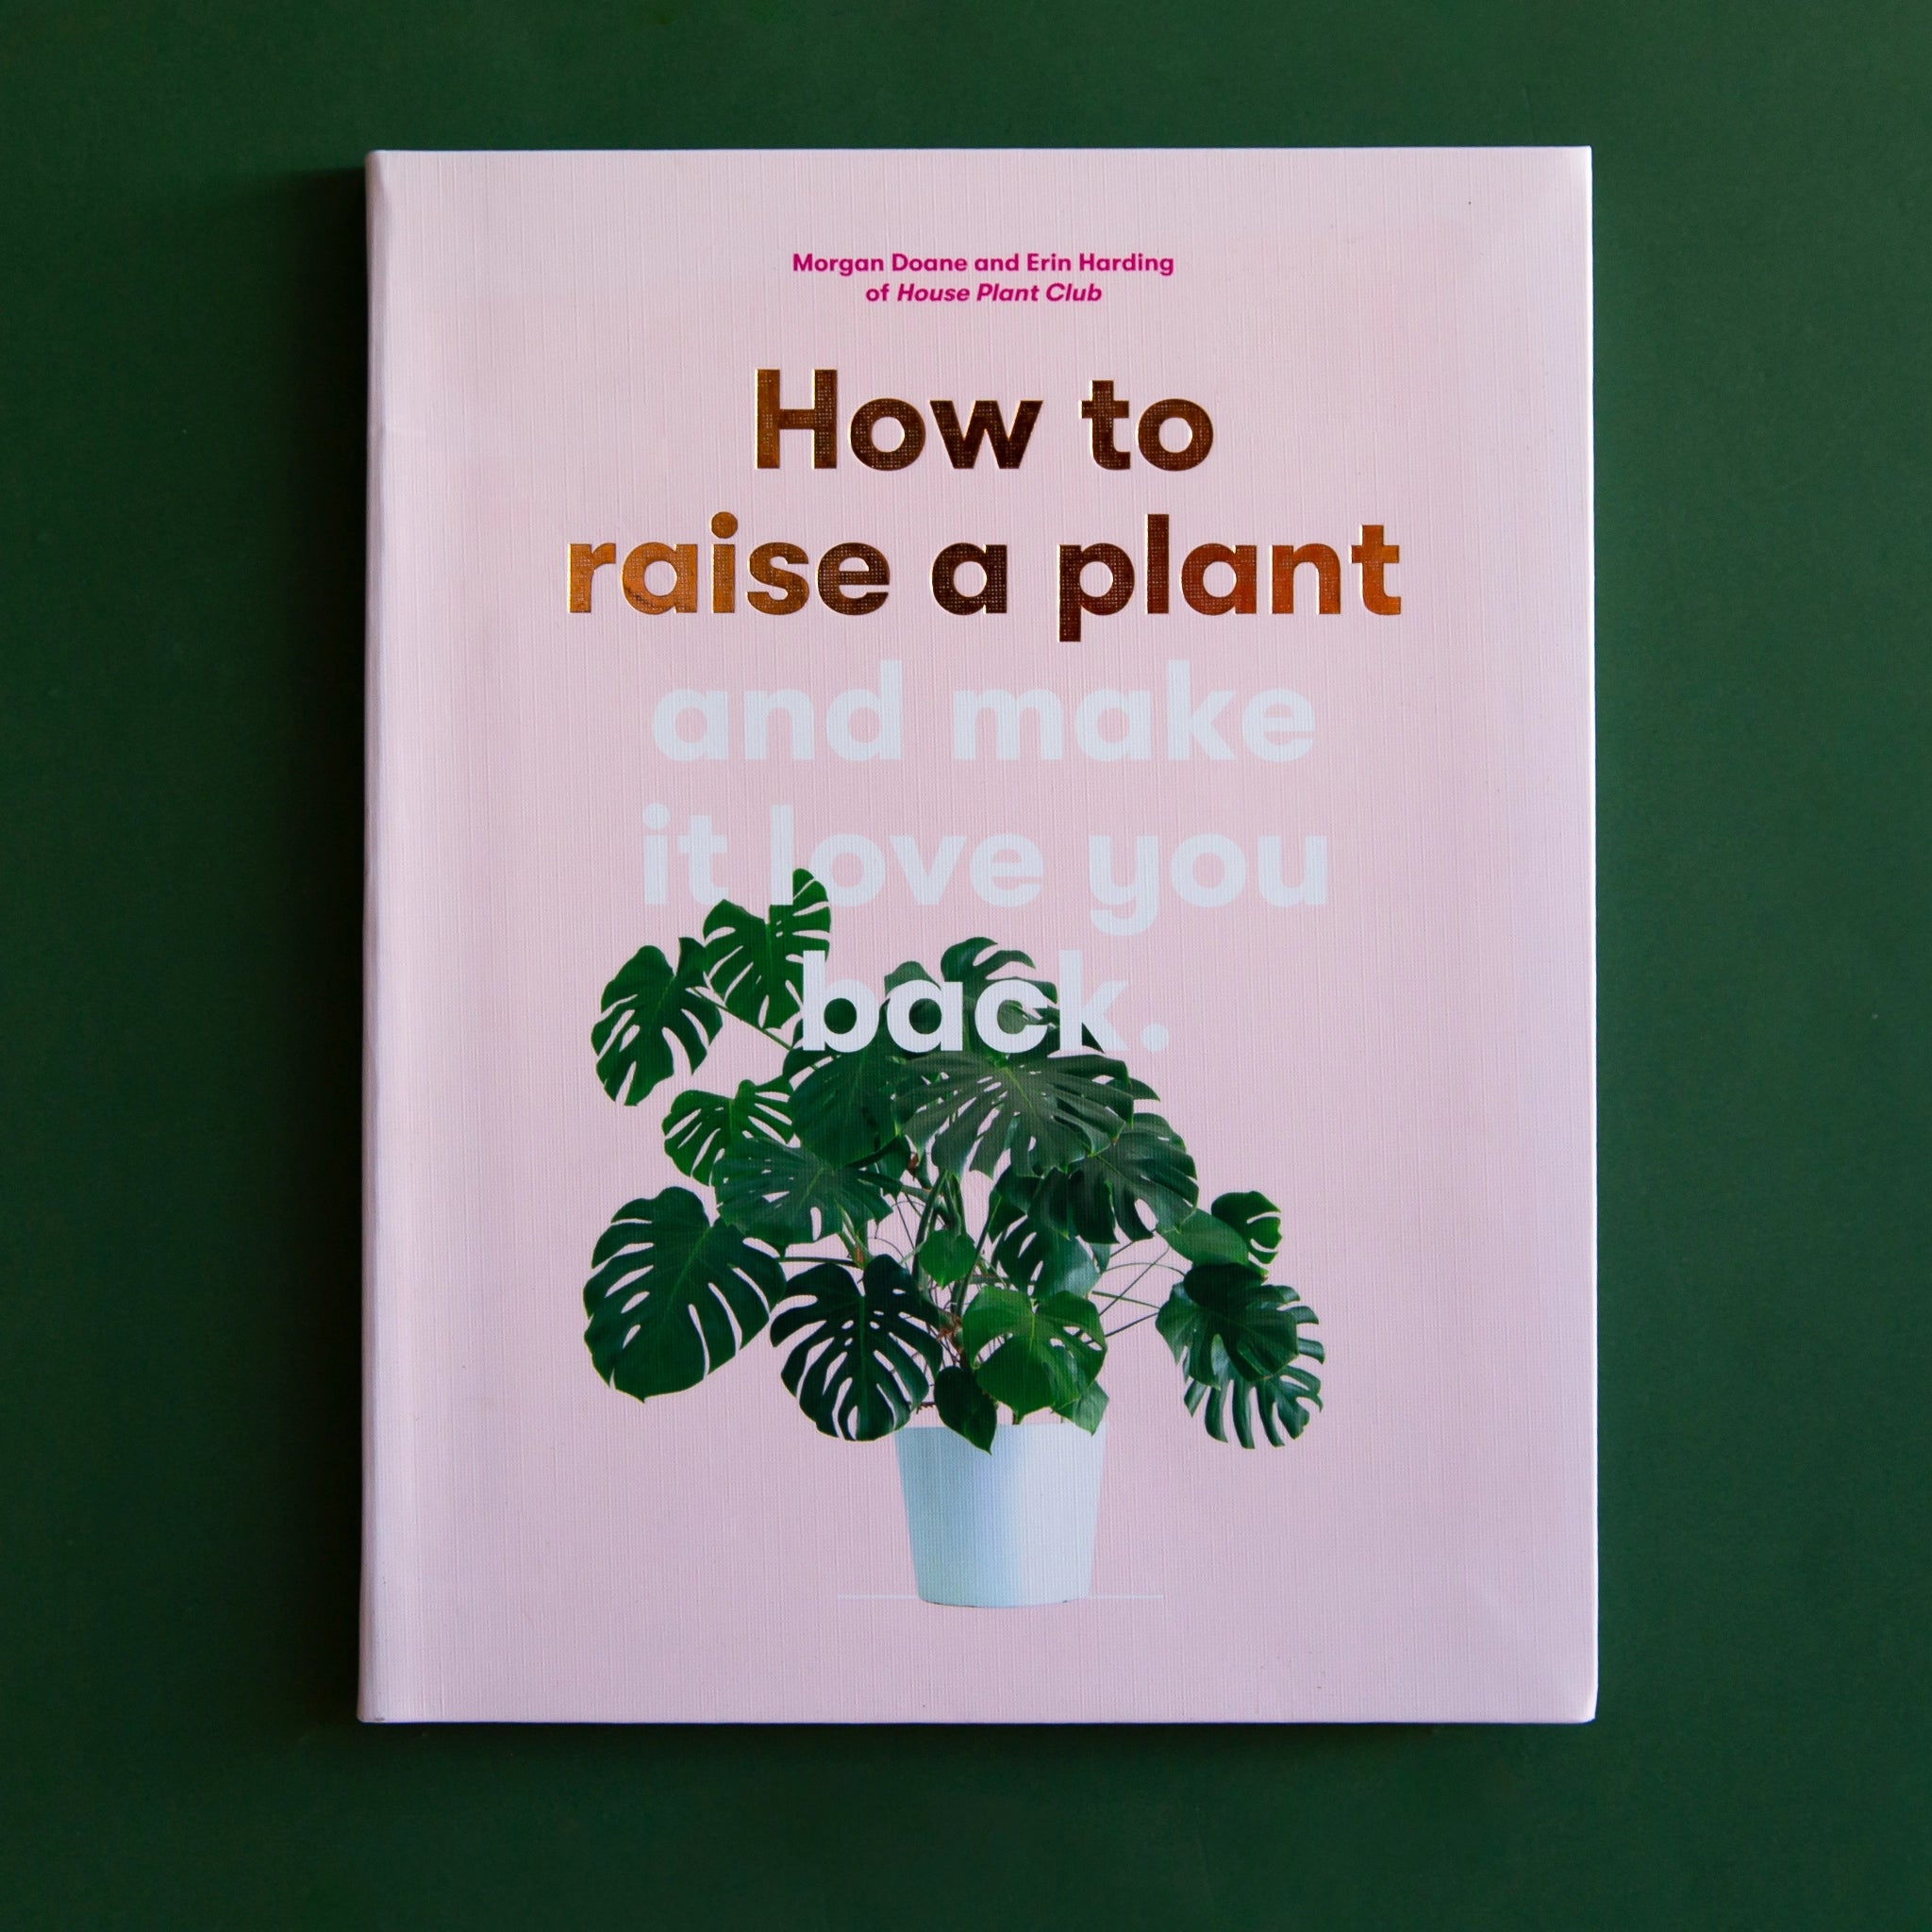 On a dark green background is a light pink book cover with a green monstera on the front along with the title that reads, "How to raise a plant and make it love you back".